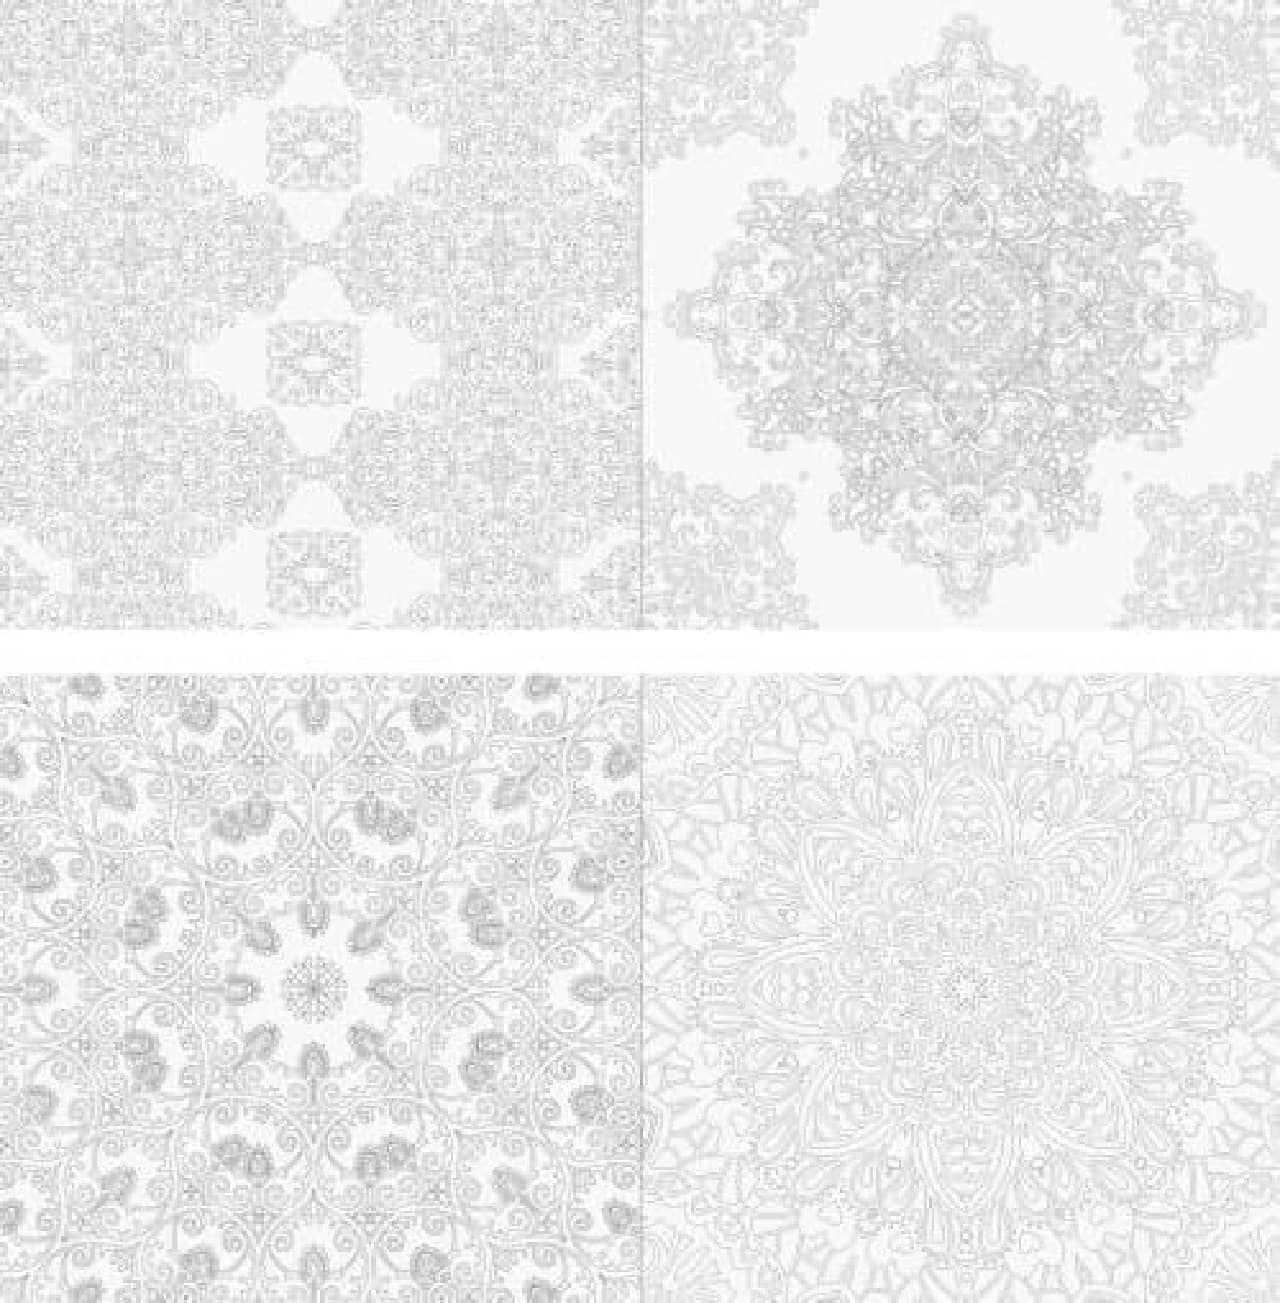 "Islamic pattern and mosaic coloring book" that you can immerse yourself in